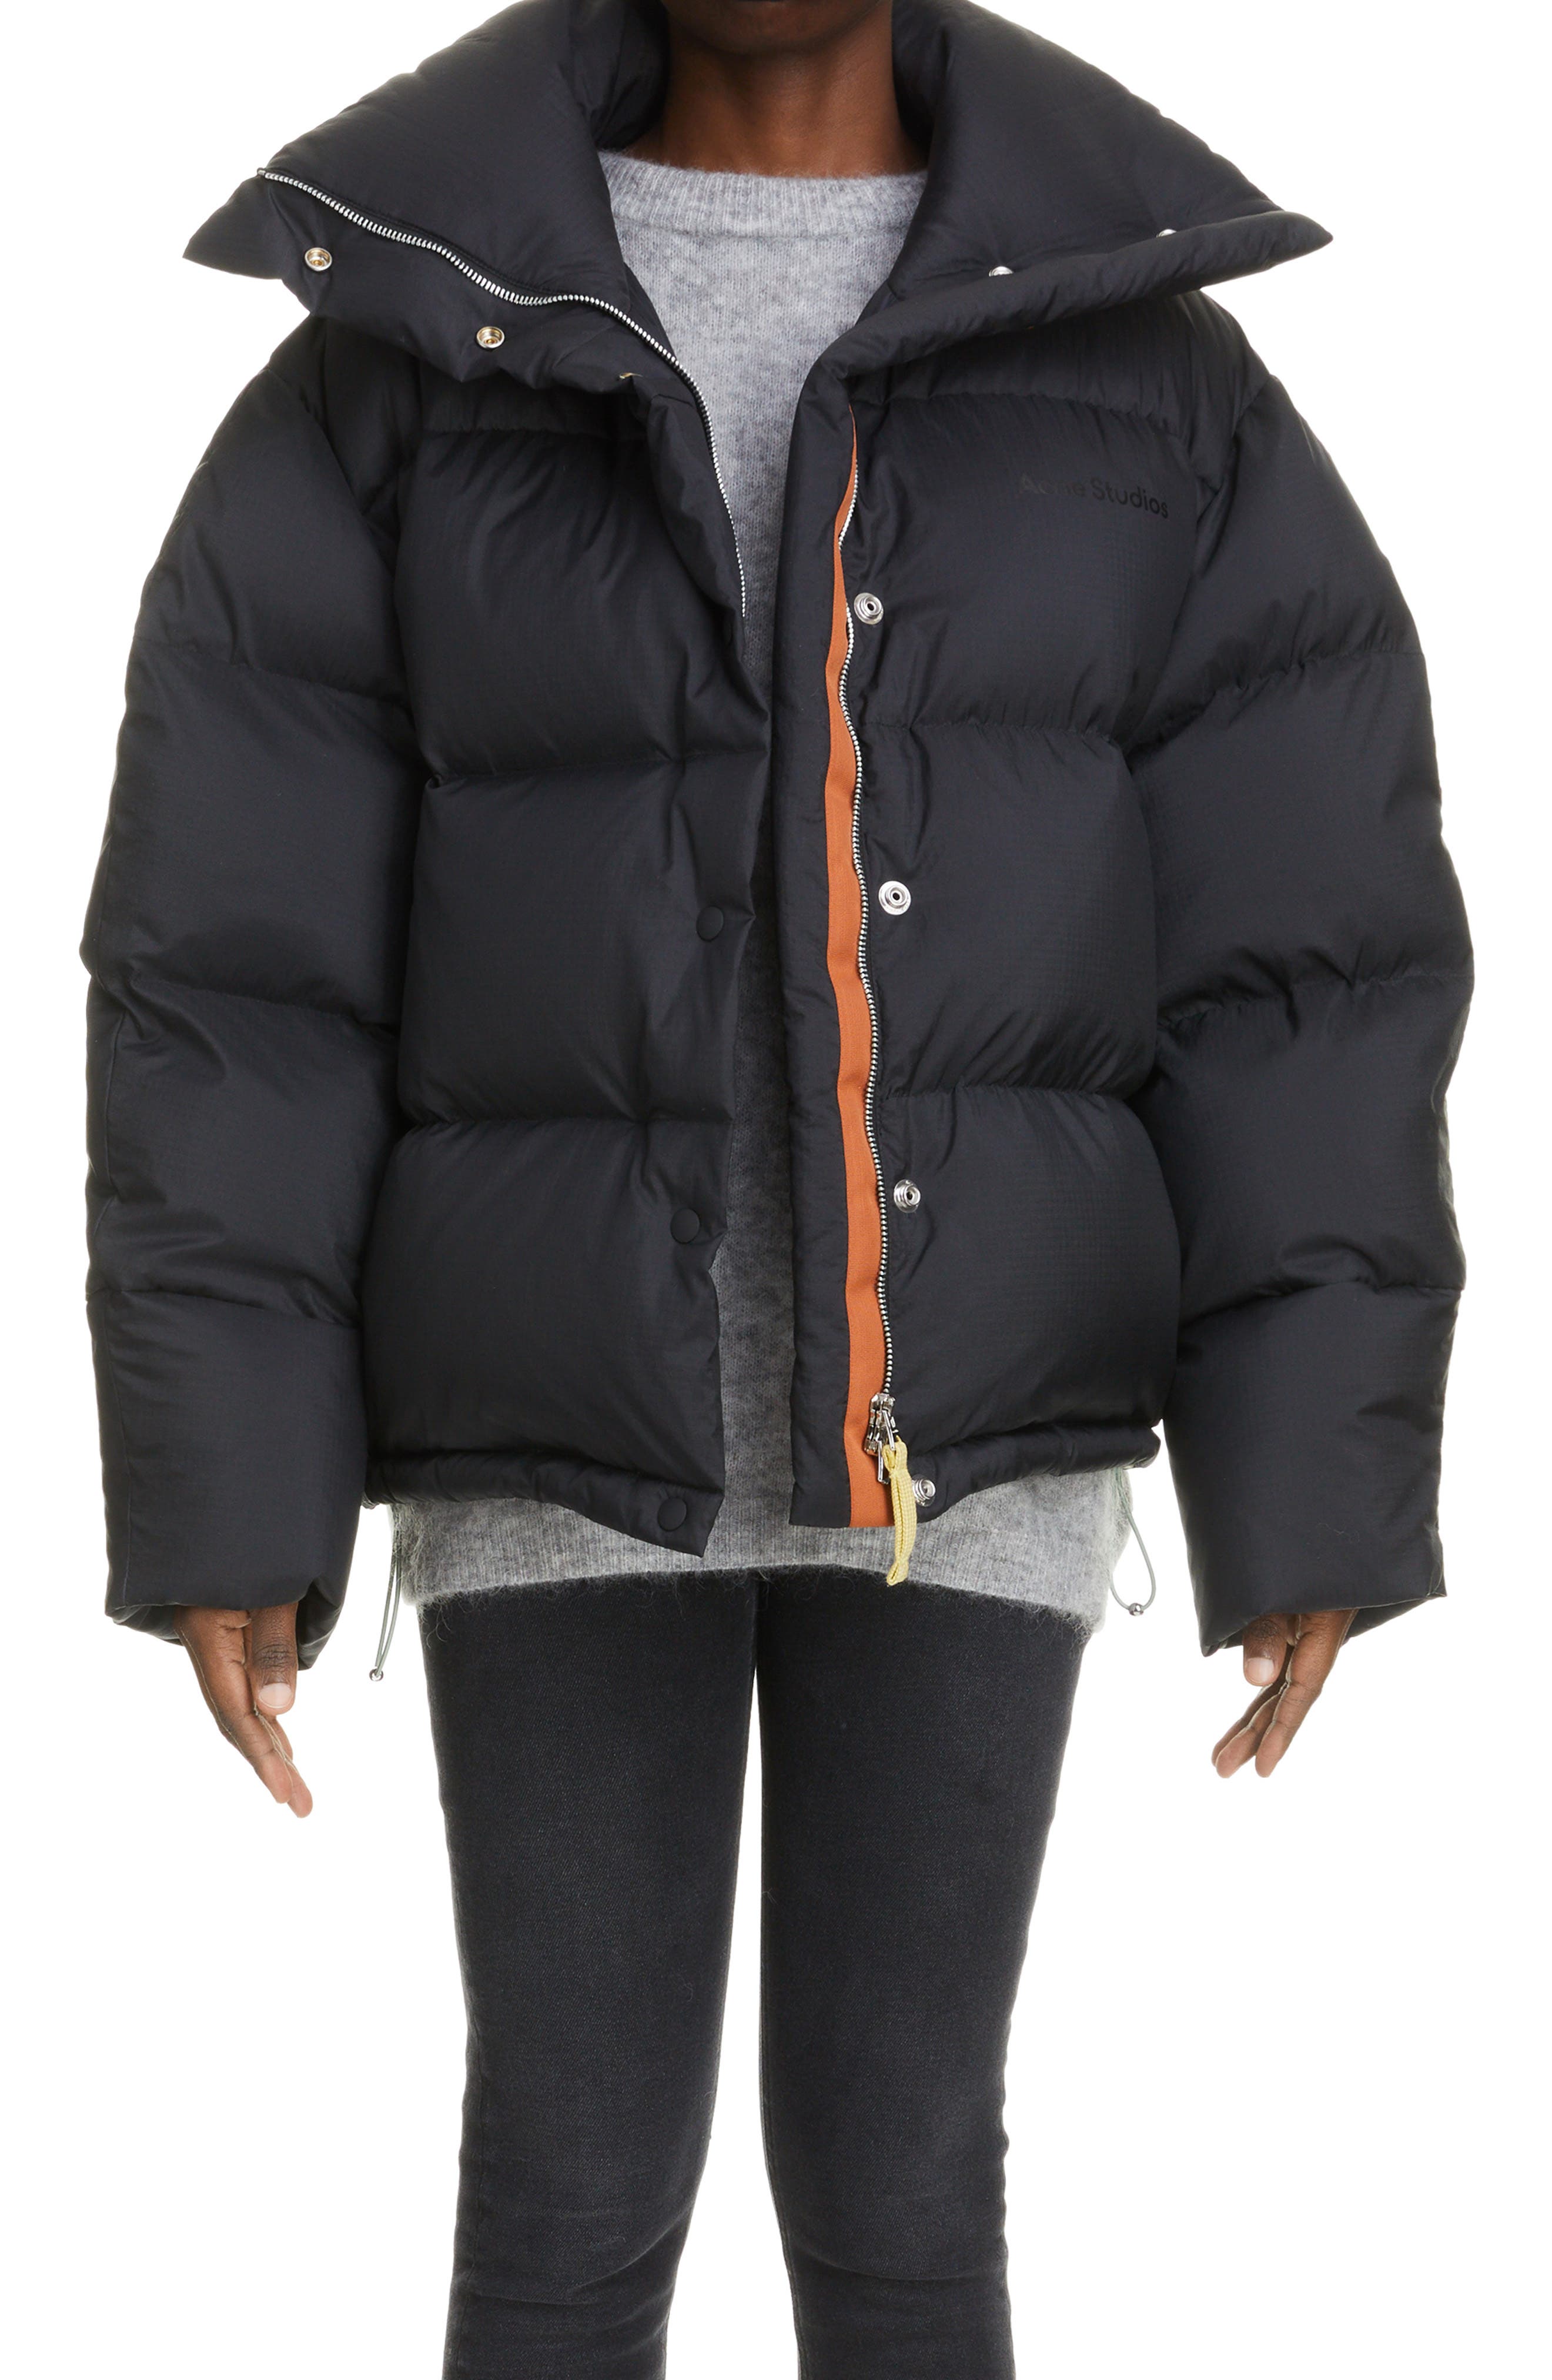 Acne Studios Olimera Ripstop Down Puffer Jacket in Black at Nordstrom, Size 8 Us